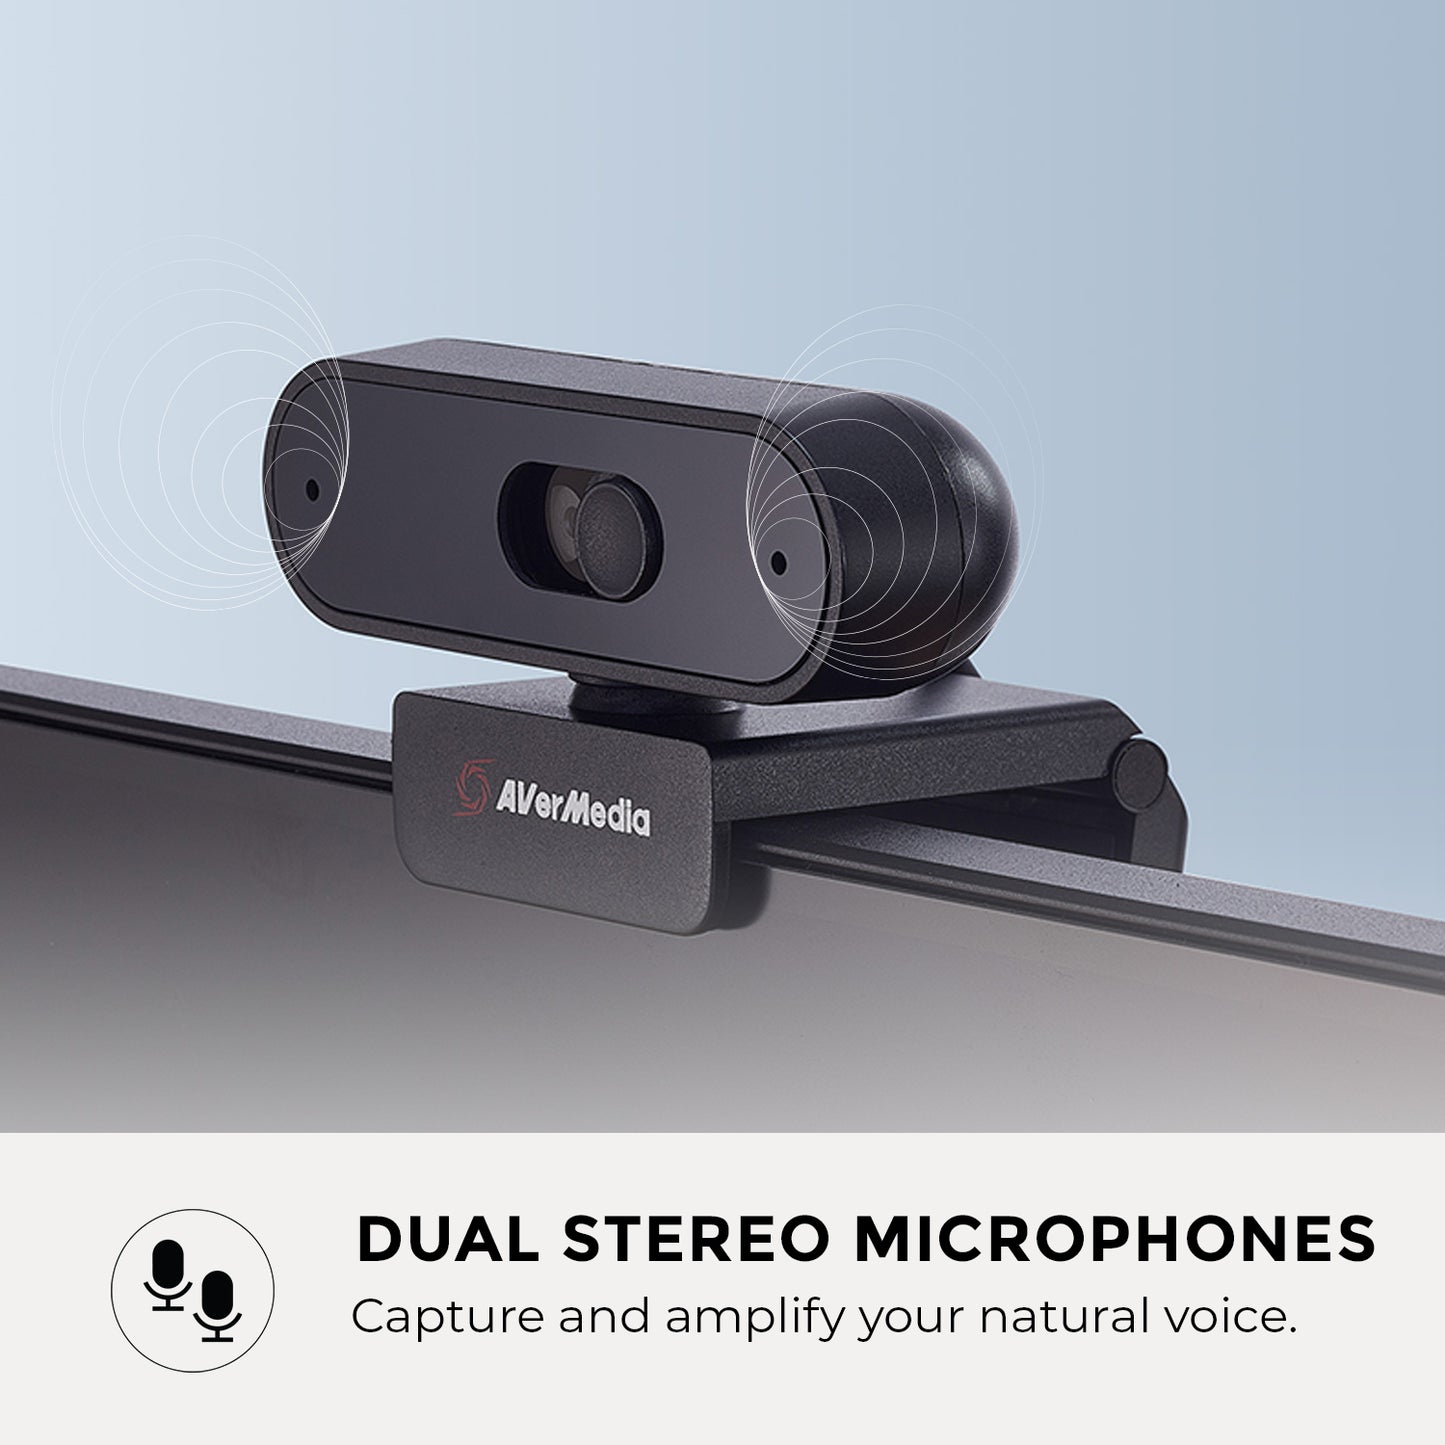 1080p30 webcam with 2 stereo microphones